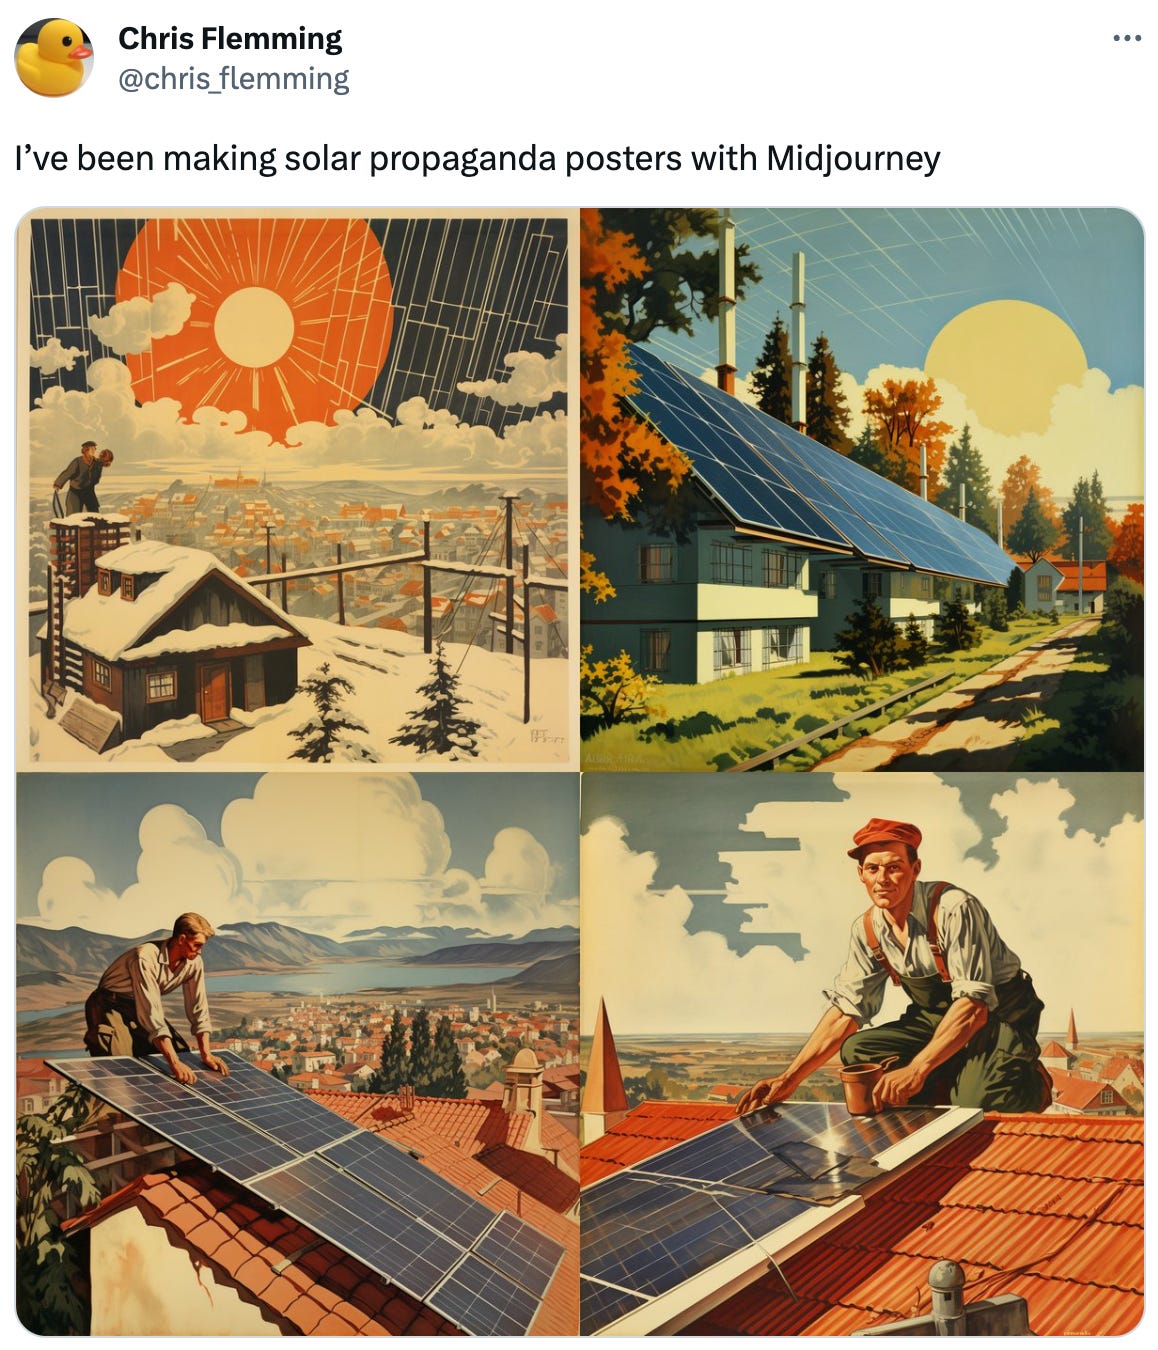  See new Tweets Conversation Noah Smith 🐇🇺🇸🇺🇦 @Noahpinion · 22h Solar is for real. Quote RethinkX @rethink_x · Aug 22 A large majority of EU countries will hit 2030 solar targets ahead of schedule. Some have already achieved them.  https://politico.eu/article/solar-power-global-emissions-climate-crisis-eu-blindsided-by-spectacular-solar-rollout/ Chris Flemming @chris_flemming I’ve been making solar propaganda posters with Midjourney